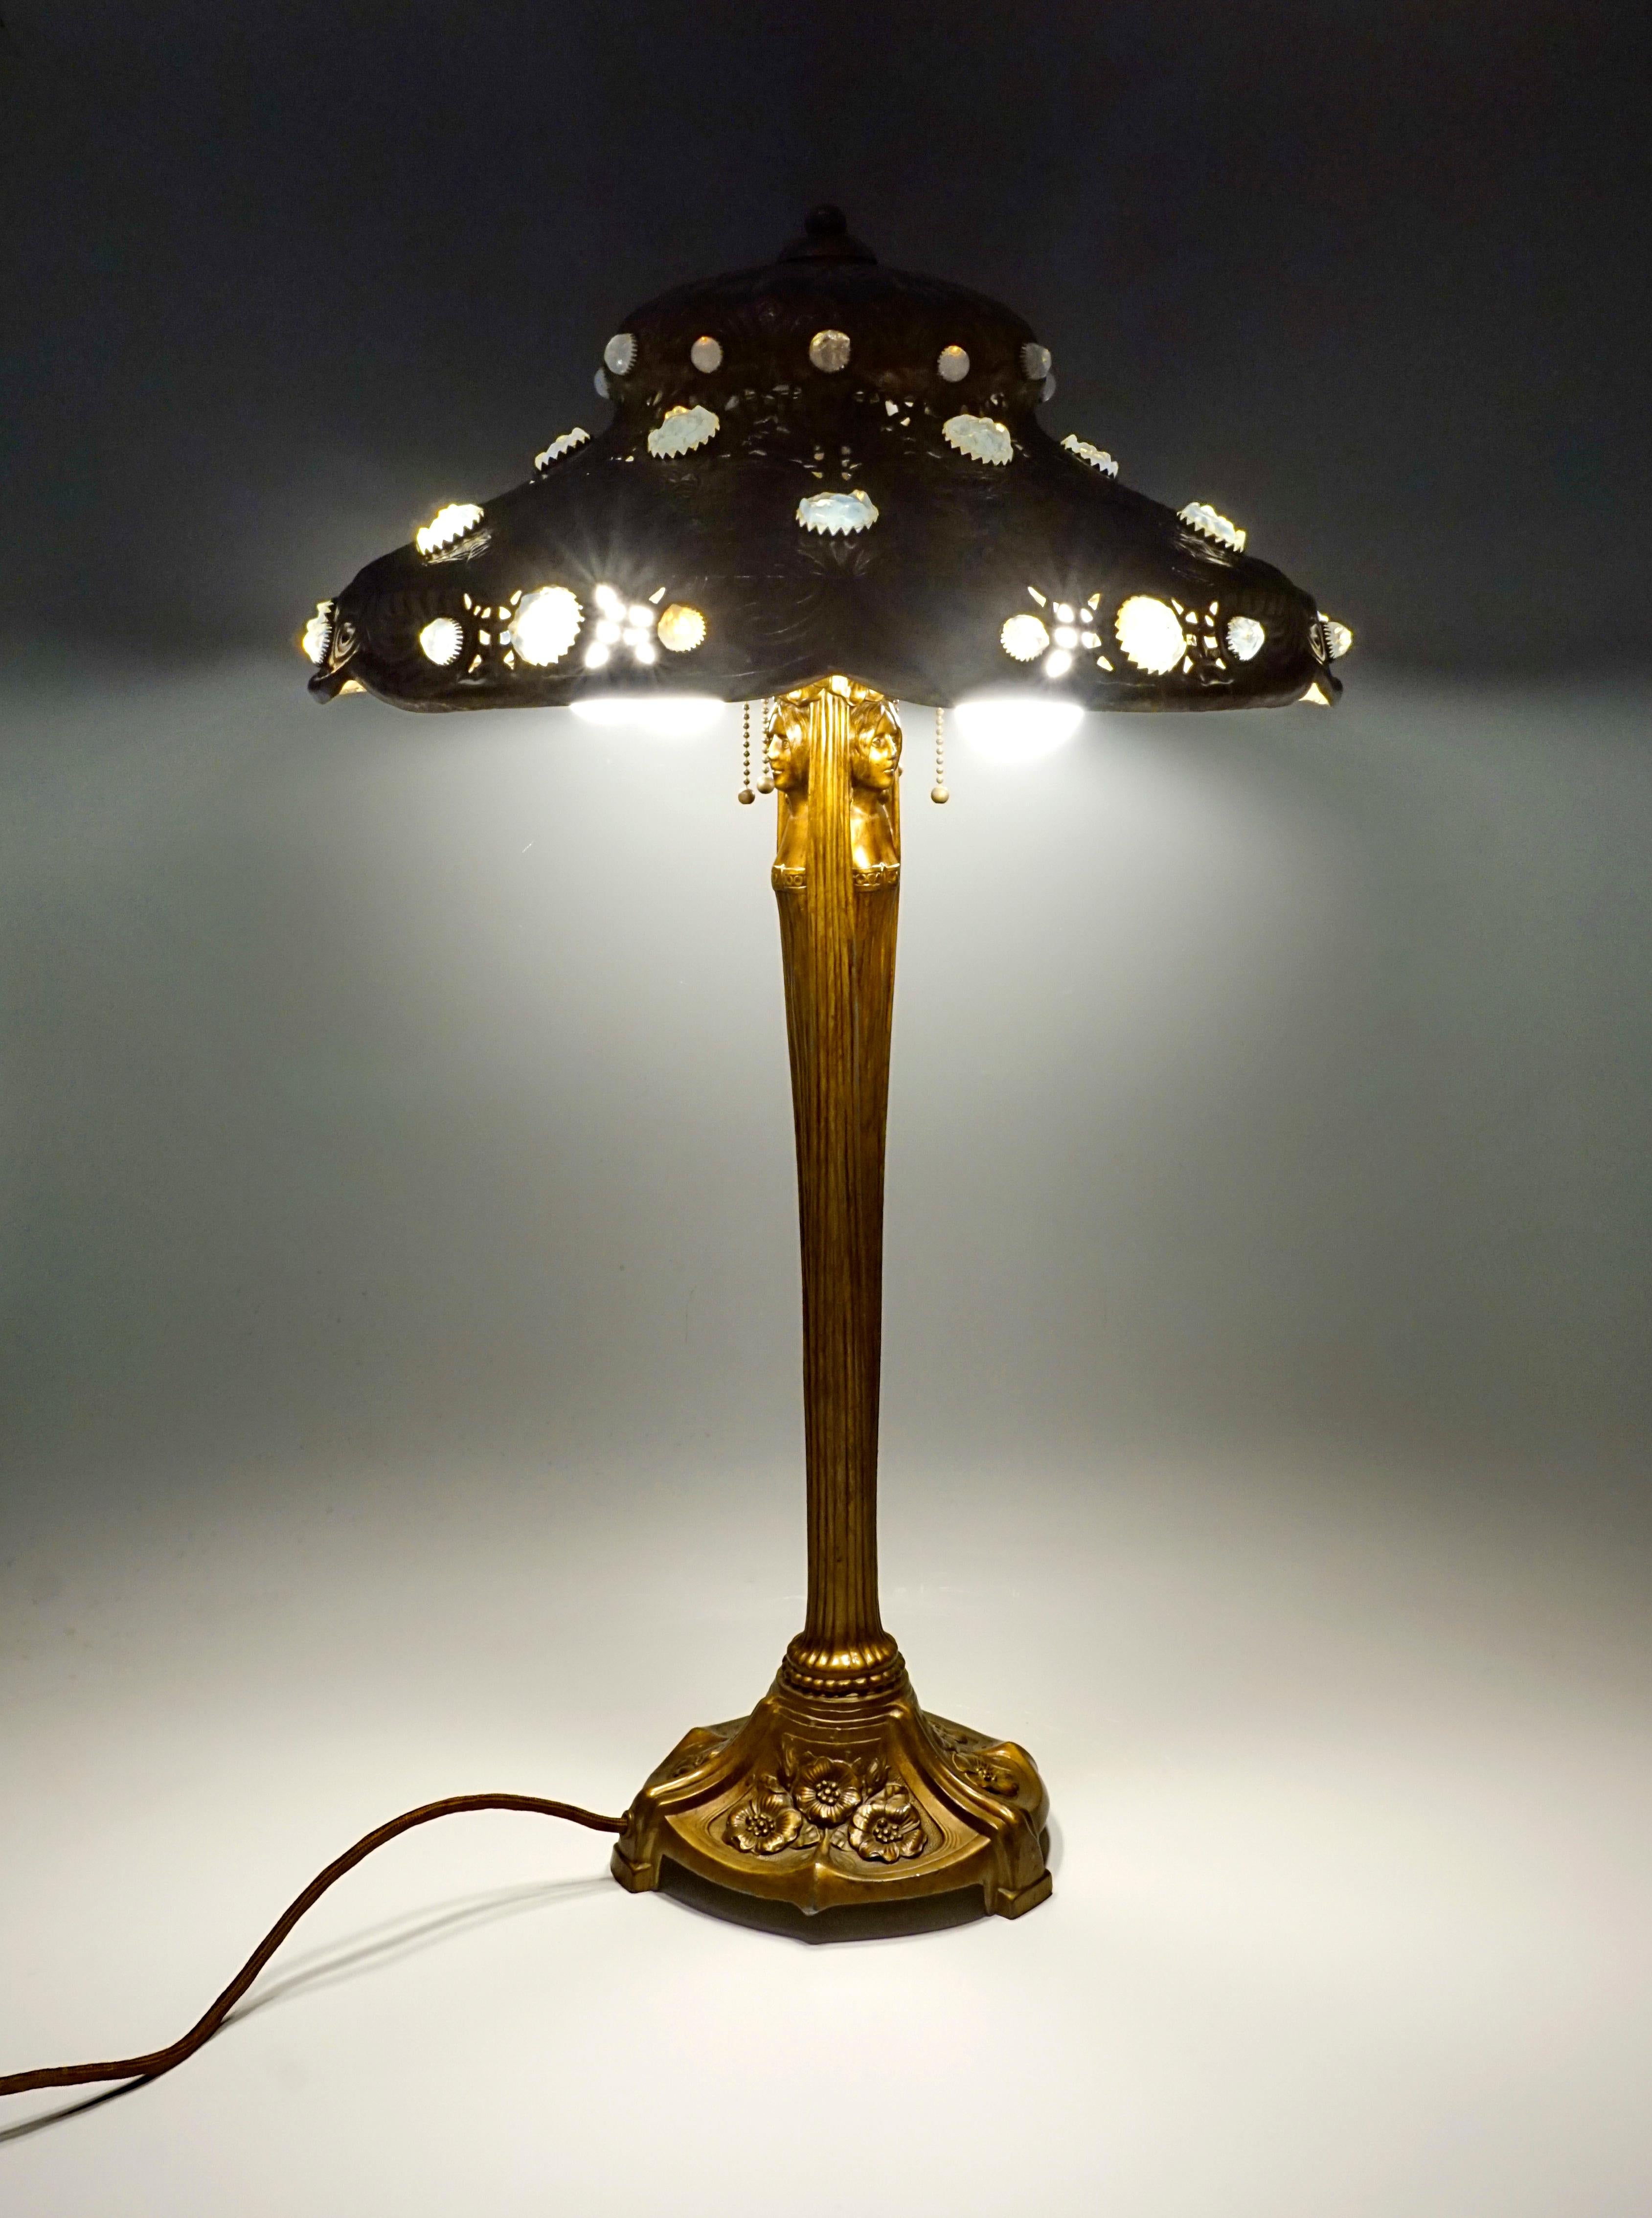 High table lamp on a round base divided into three segments filled with floral decorations, slender, high, widening, profiled column with embedded caryatids, hat-shaped, stepped metal shade with embossed floral elements and leaves, as well as